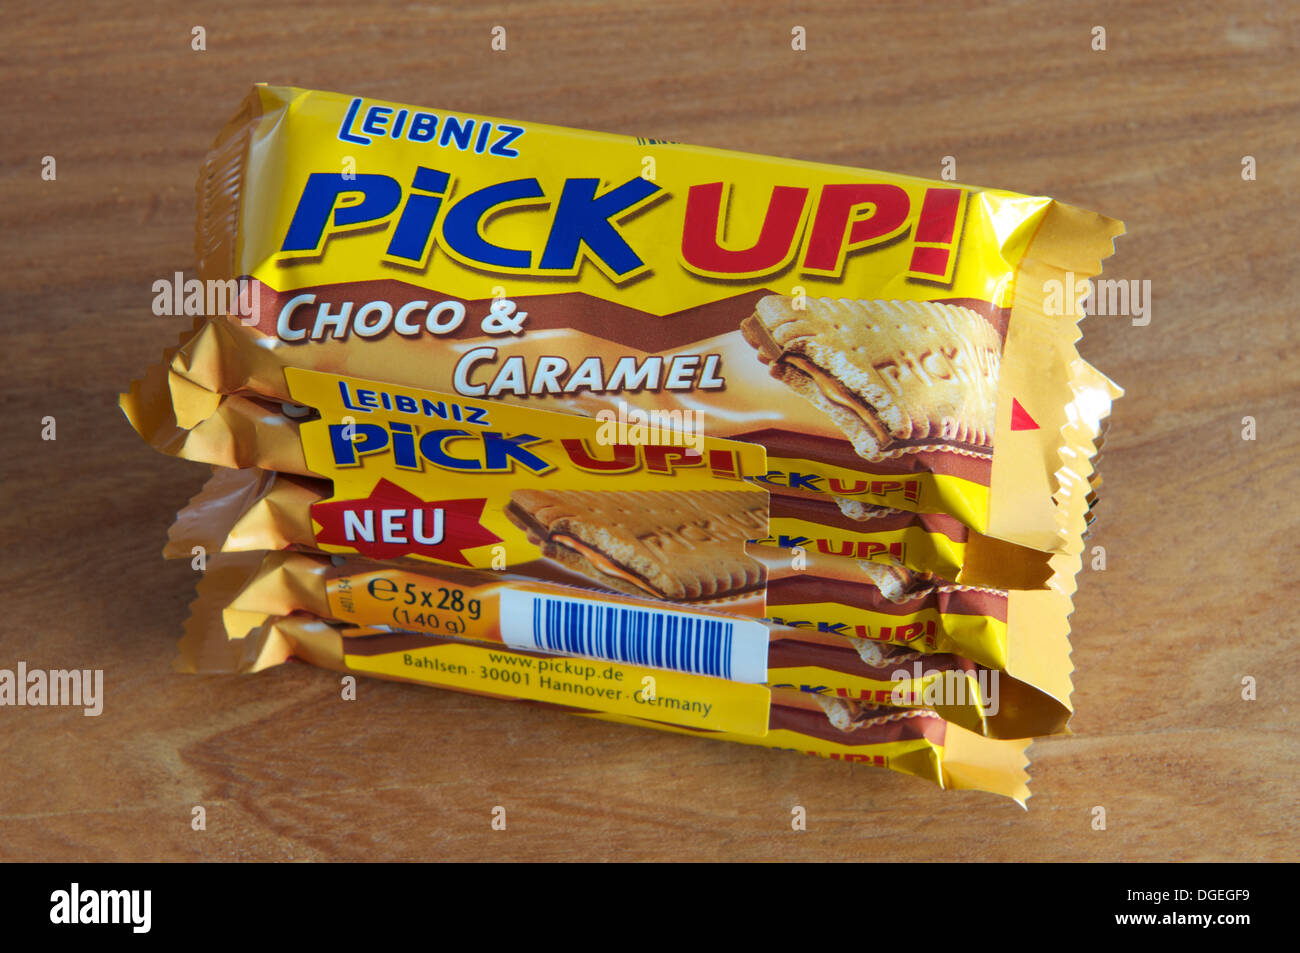 Pick up chocolate and photography hi-res - biscuits stock Alamy images